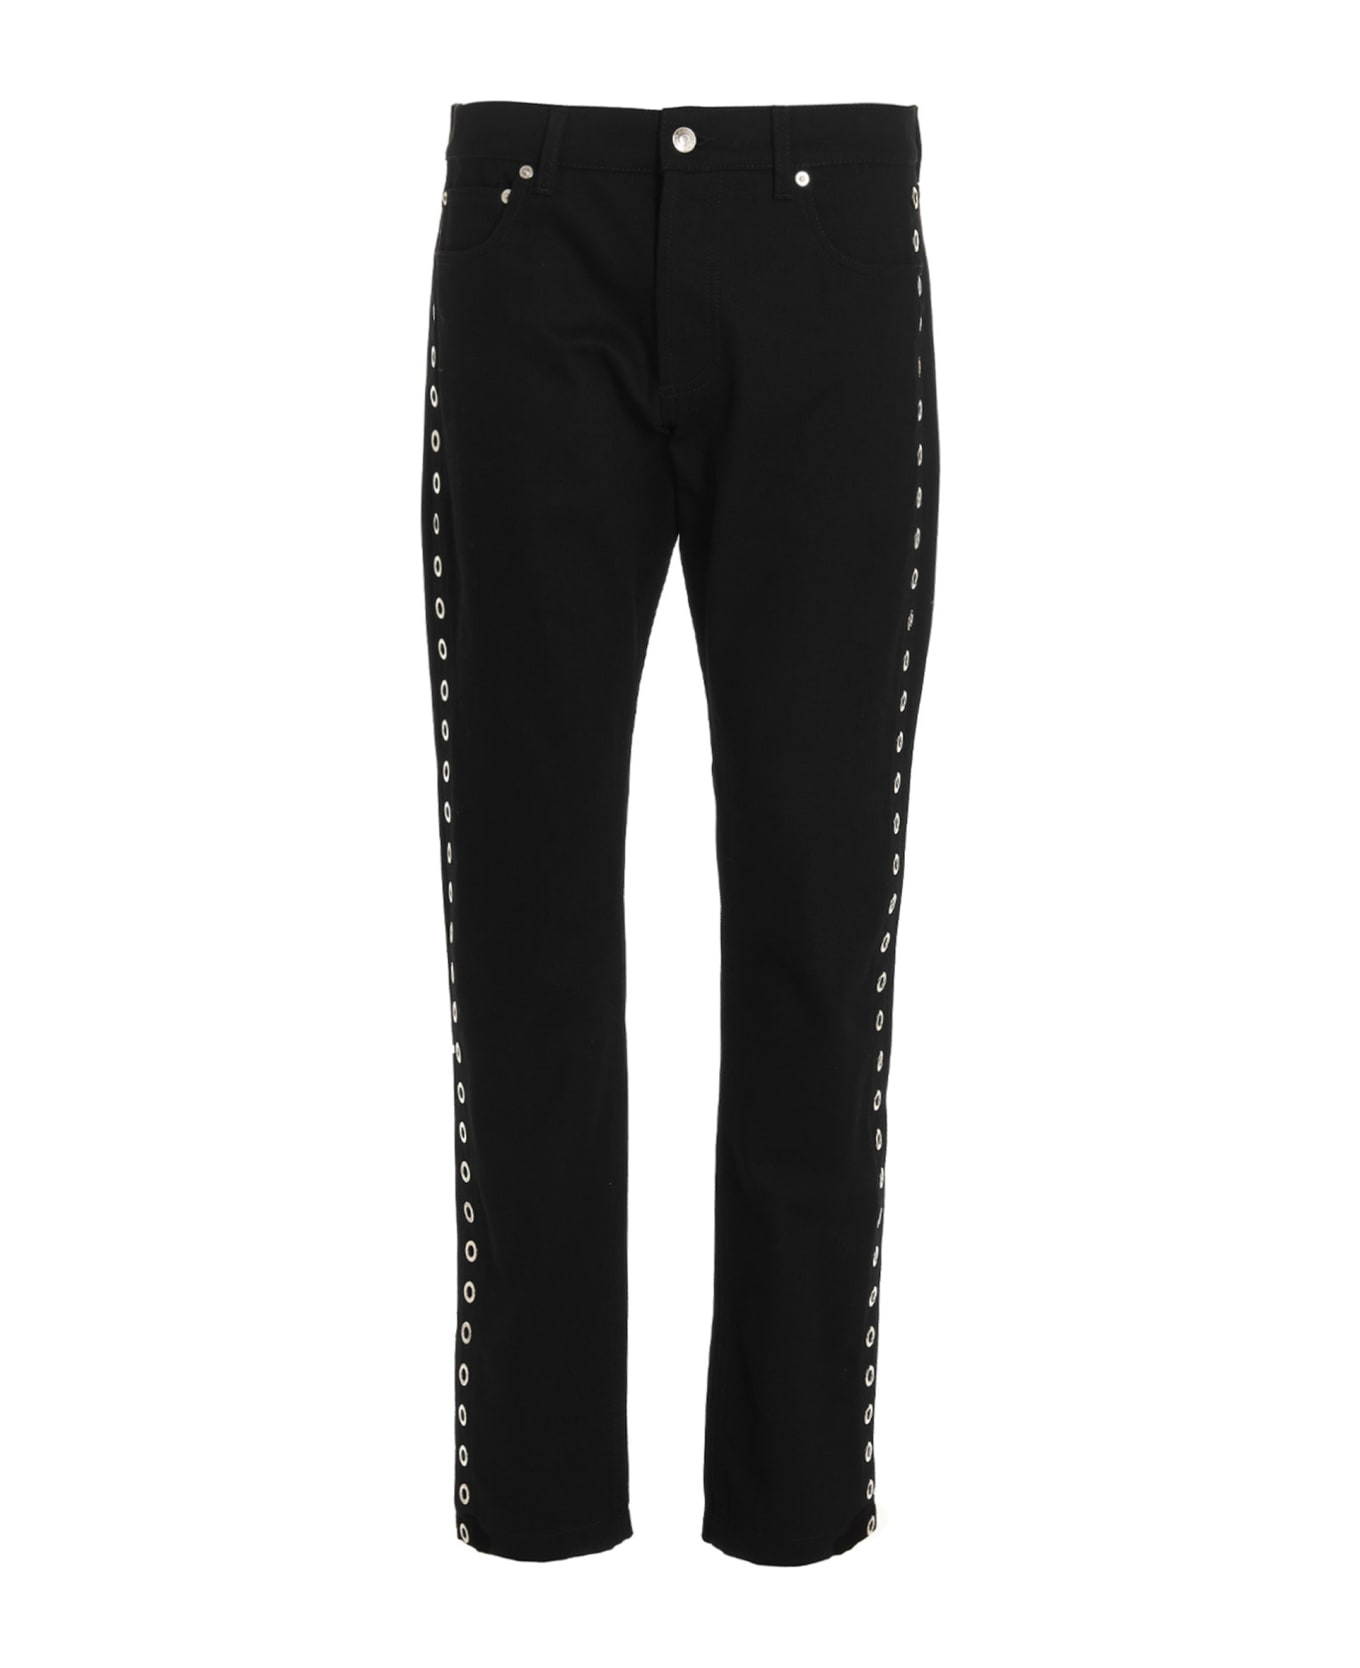 Alexander McQueen Studded Jeans - Black   ボトムス